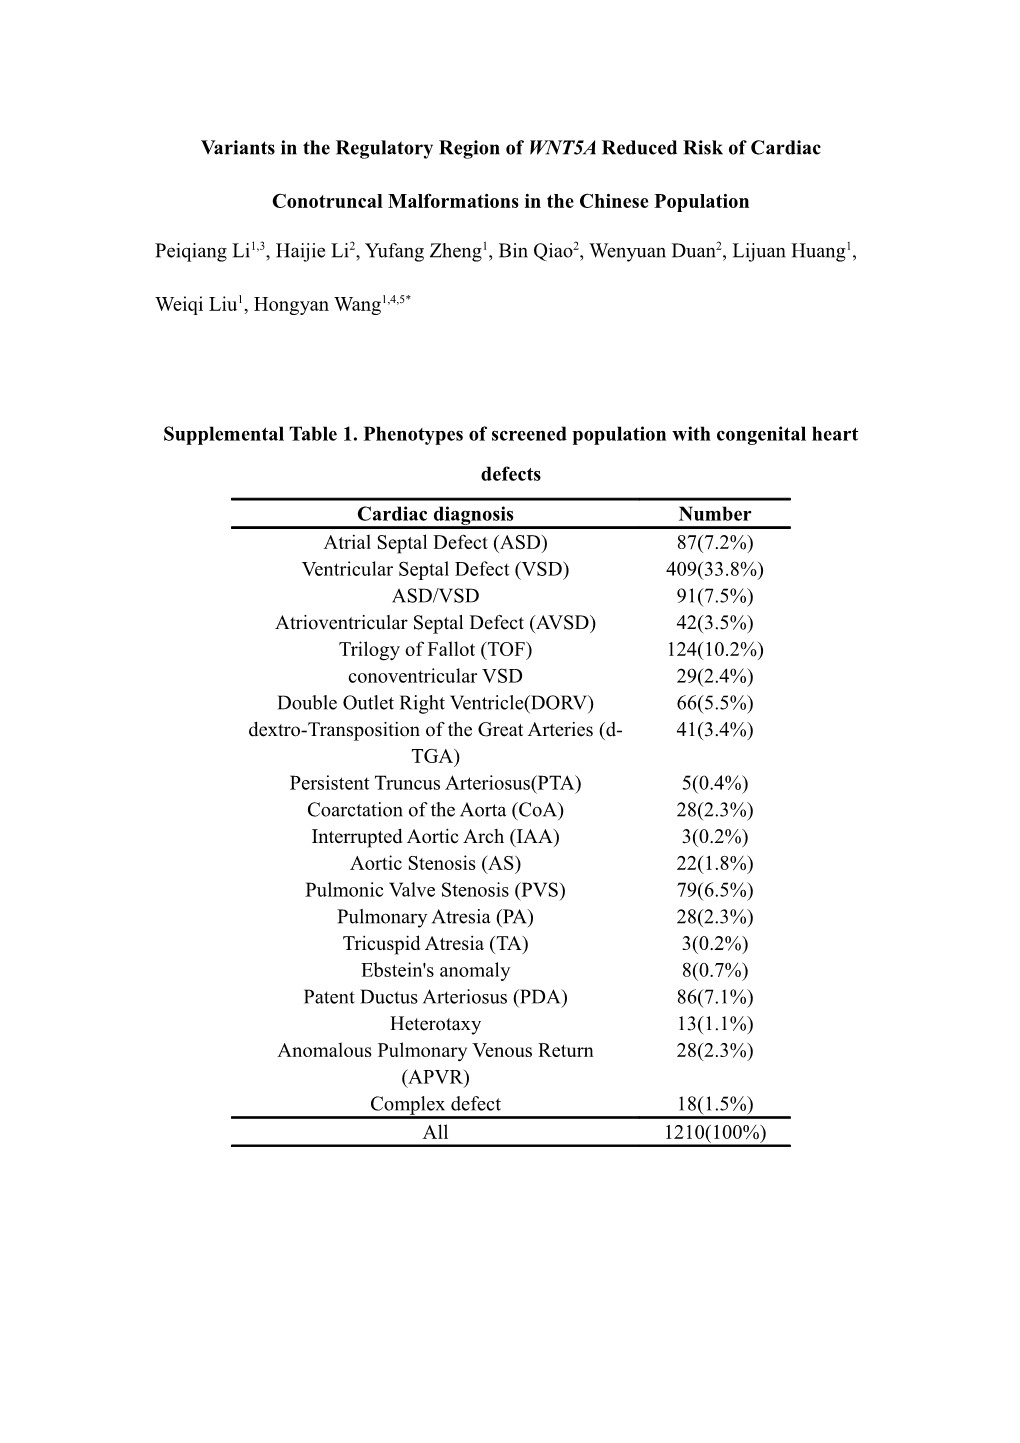 Supplemental Table 1. Phenotypes of Screened Population with Congenital Heart Defects